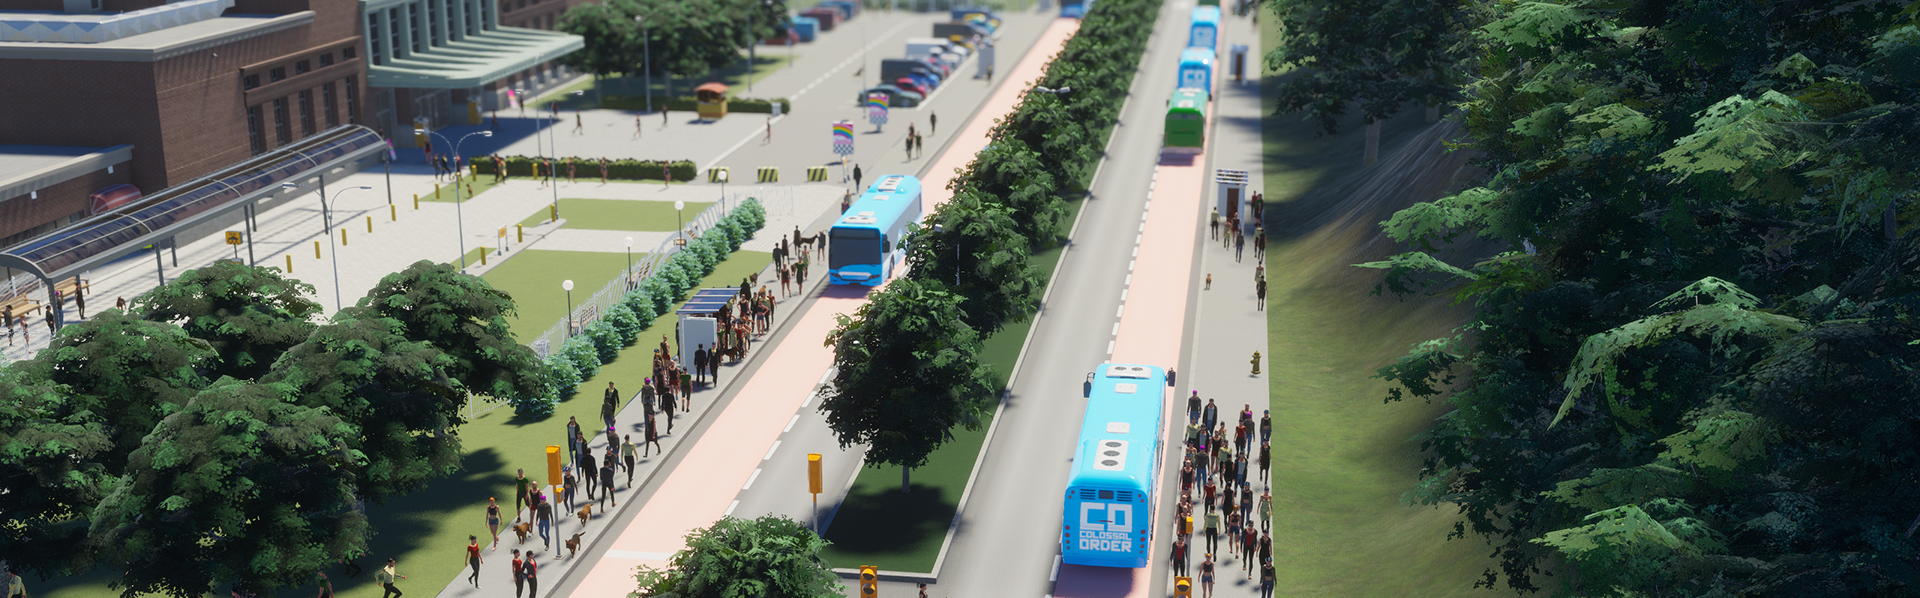 cities-buses-public1